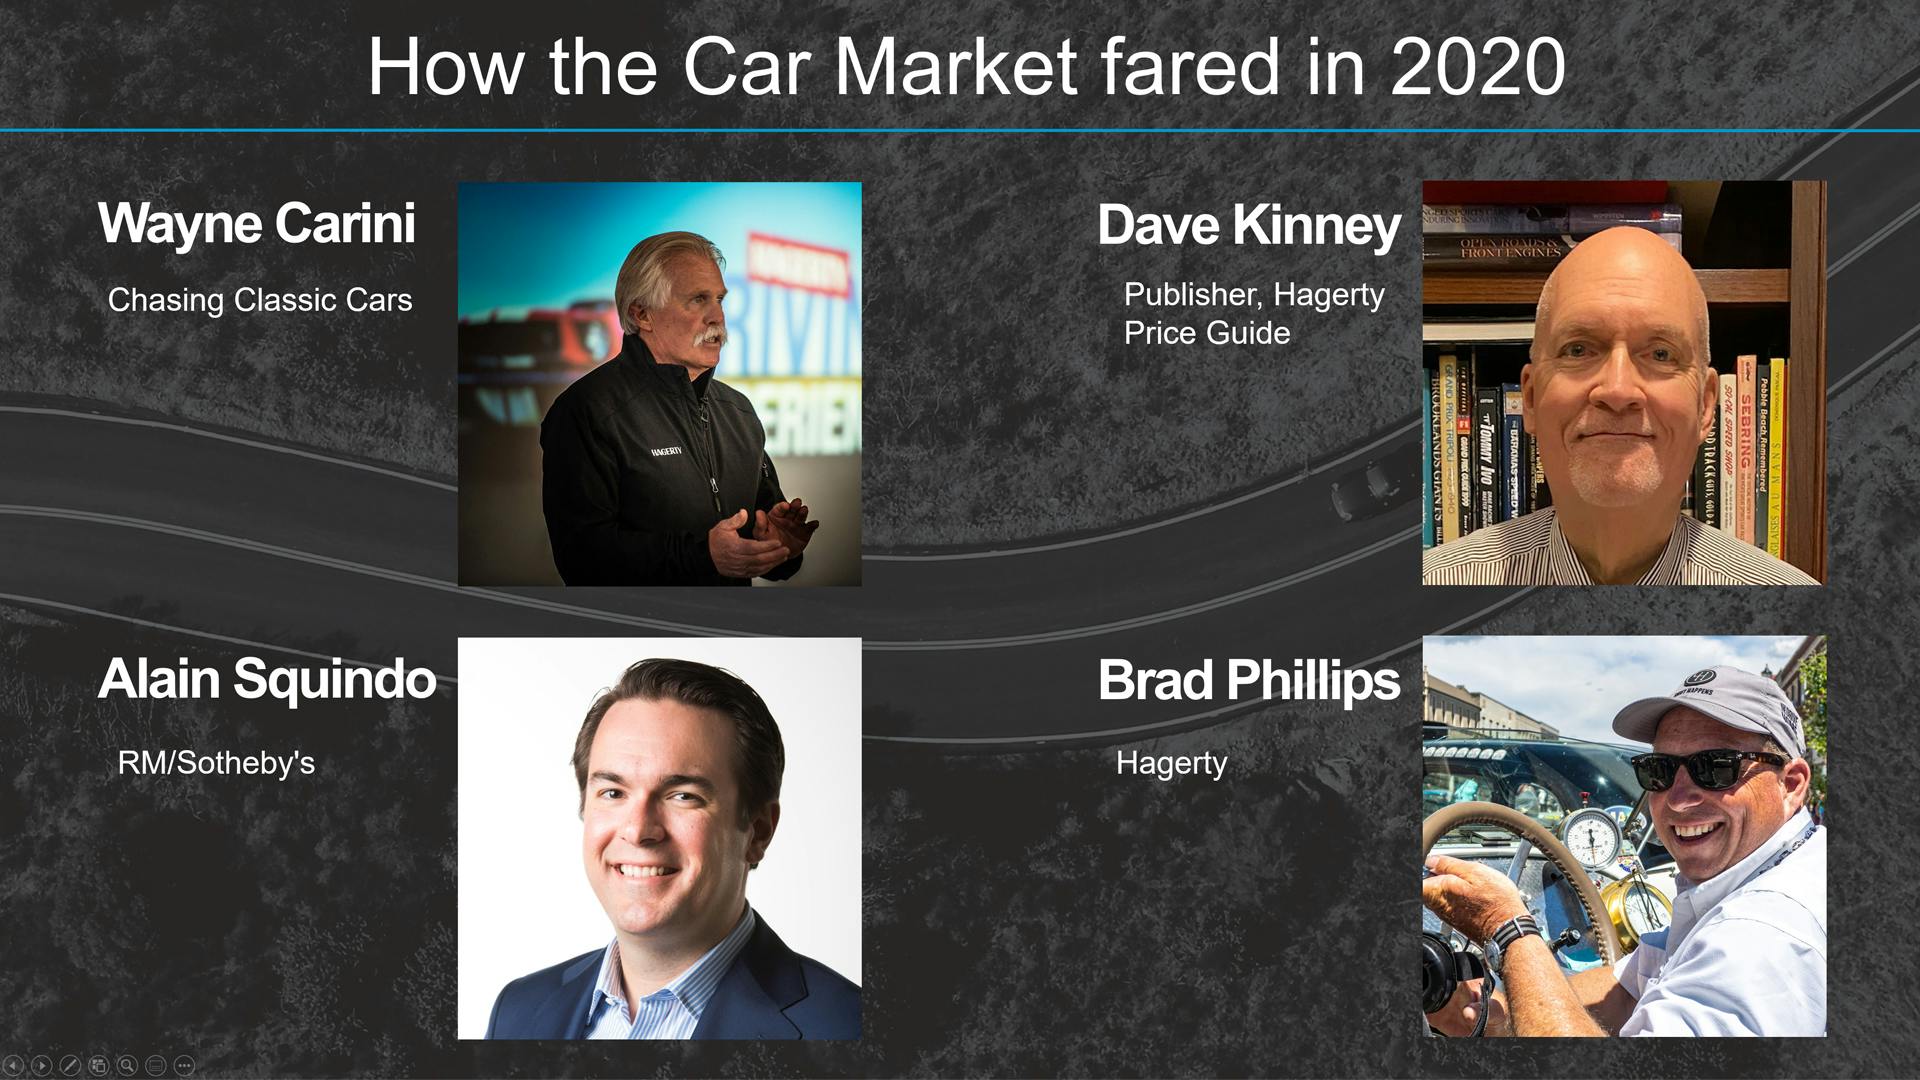 How did the Car Market Fare in 2020